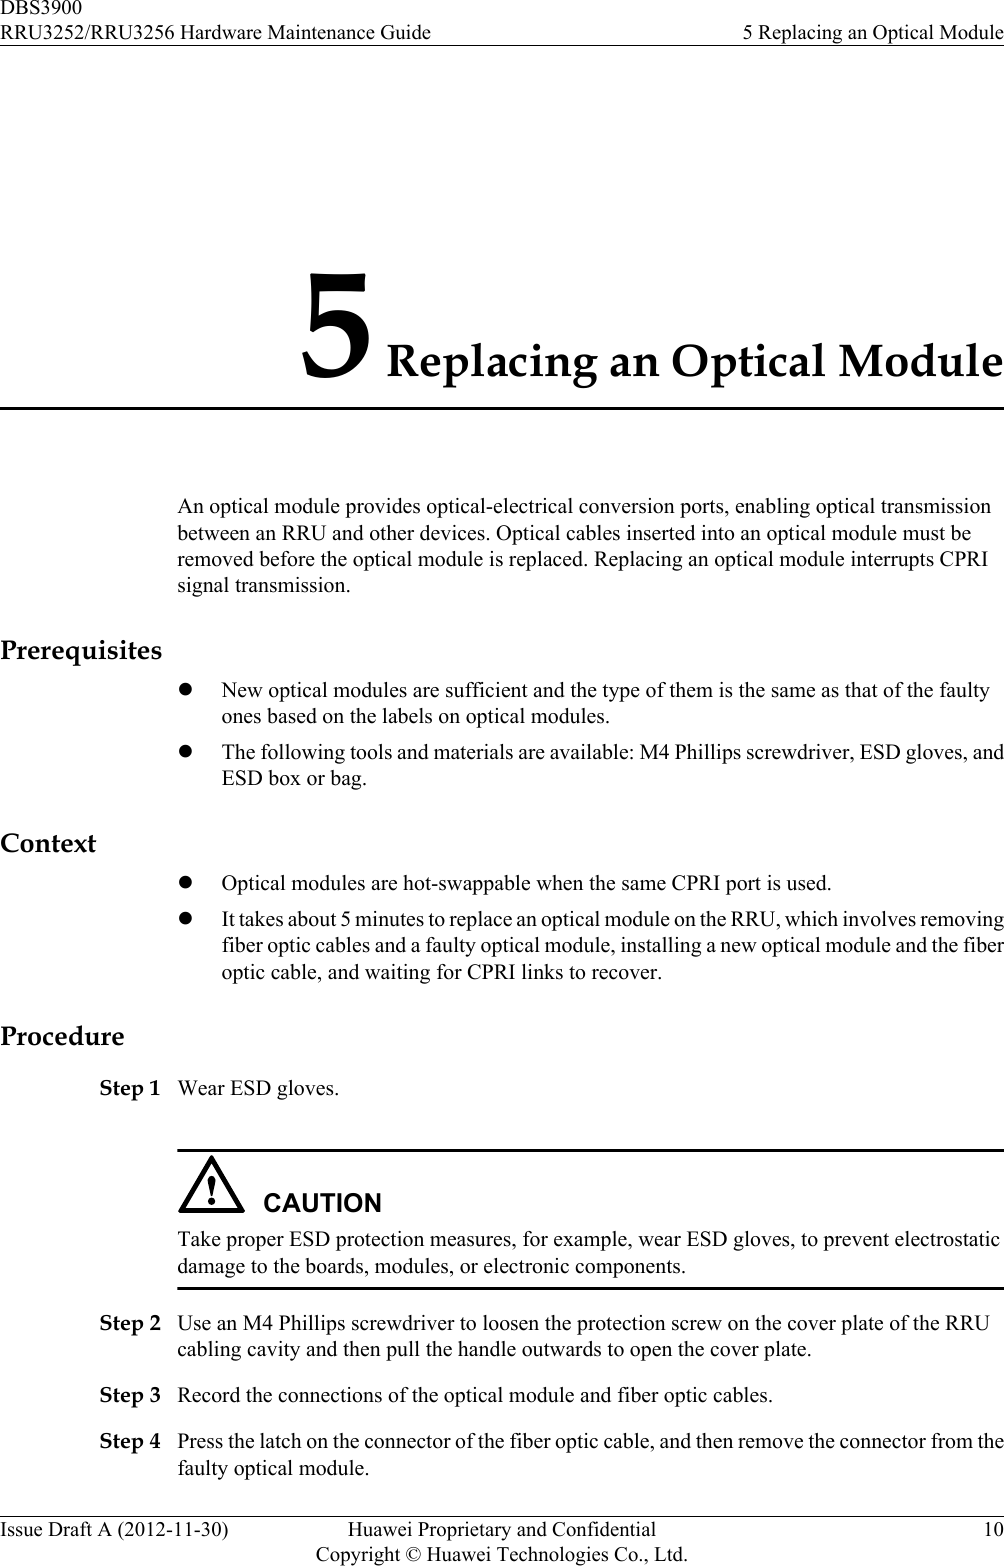 5 Replacing an Optical ModuleAn optical module provides optical-electrical conversion ports, enabling optical transmissionbetween an RRU and other devices. Optical cables inserted into an optical module must beremoved before the optical module is replaced. Replacing an optical module interrupts CPRIsignal transmission.PrerequisiteslNew optical modules are sufficient and the type of them is the same as that of the faultyones based on the labels on optical modules.lThe following tools and materials are available: M4 Phillips screwdriver, ESD gloves, andESD box or bag.ContextlOptical modules are hot-swappable when the same CPRI port is used.lIt takes about 5 minutes to replace an optical module on the RRU, which involves removingfiber optic cables and a faulty optical module, installing a new optical module and the fiberoptic cable, and waiting for CPRI links to recover.ProcedureStep 1 Wear ESD gloves.CAUTIONTake proper ESD protection measures, for example, wear ESD gloves, to prevent electrostaticdamage to the boards, modules, or electronic components.Step 2 Use an M4 Phillips screwdriver to loosen the protection screw on the cover plate of the RRUcabling cavity and then pull the handle outwards to open the cover plate.Step 3 Record the connections of the optical module and fiber optic cables.Step 4 Press the latch on the connector of the fiber optic cable, and then remove the connector from thefaulty optical module.DBS3900RRU3252/RRU3256 Hardware Maintenance Guide 5 Replacing an Optical ModuleIssue Draft A (2012-11-30) Huawei Proprietary and ConfidentialCopyright © Huawei Technologies Co., Ltd.10